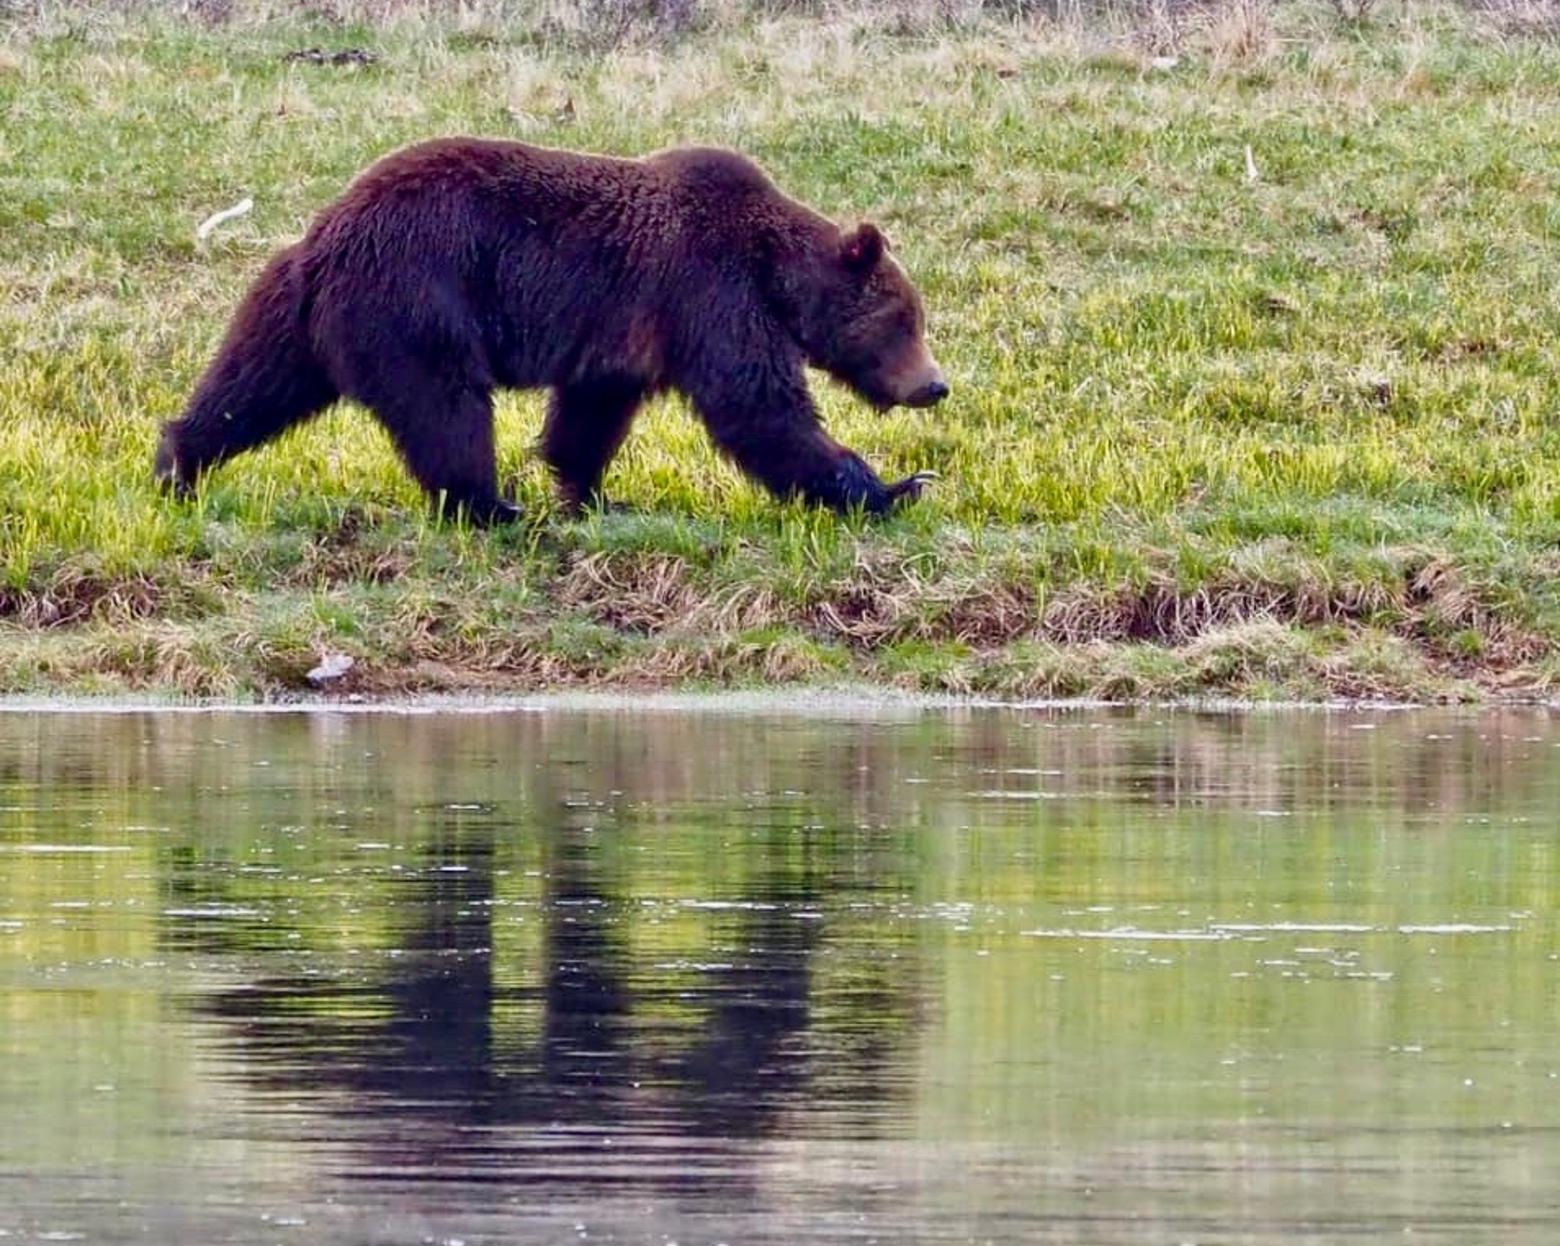 A grizzly bear in Yellowstone: what does the reflection of wild nature say about us? How do we approach the places we love with respect?  Photo courtesy Golding/Bumann 